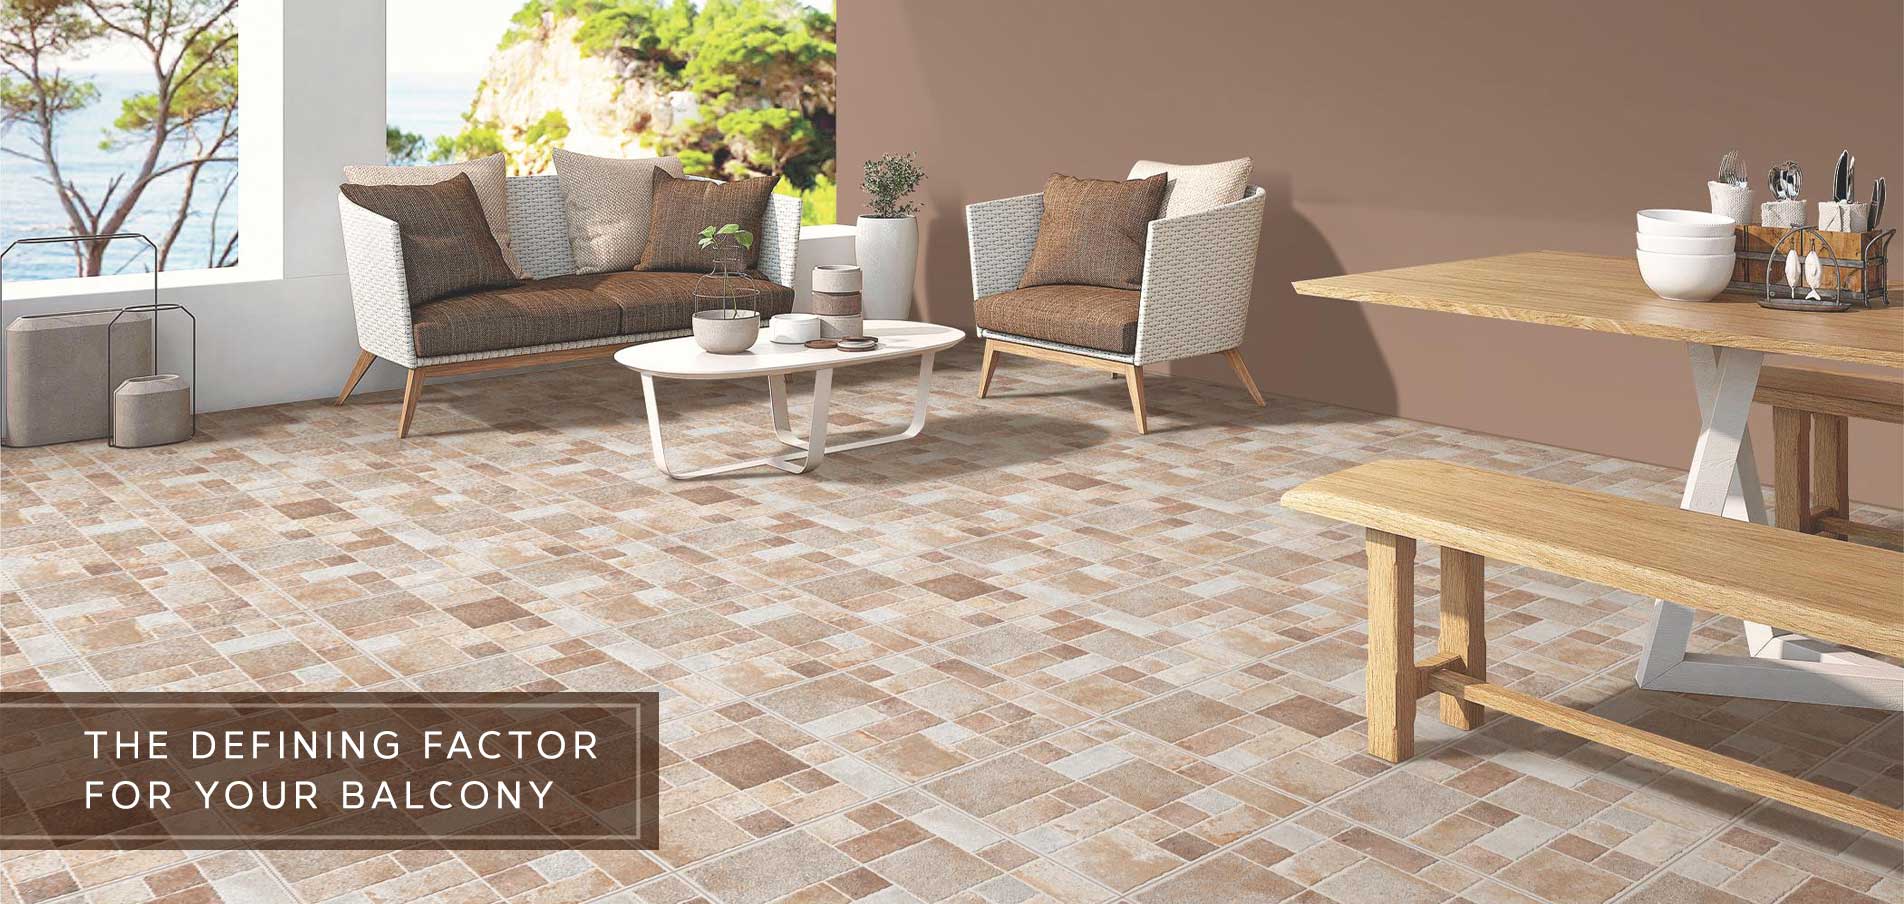 Transform Your Balcony with Stylish and Functional Balcony Tiles